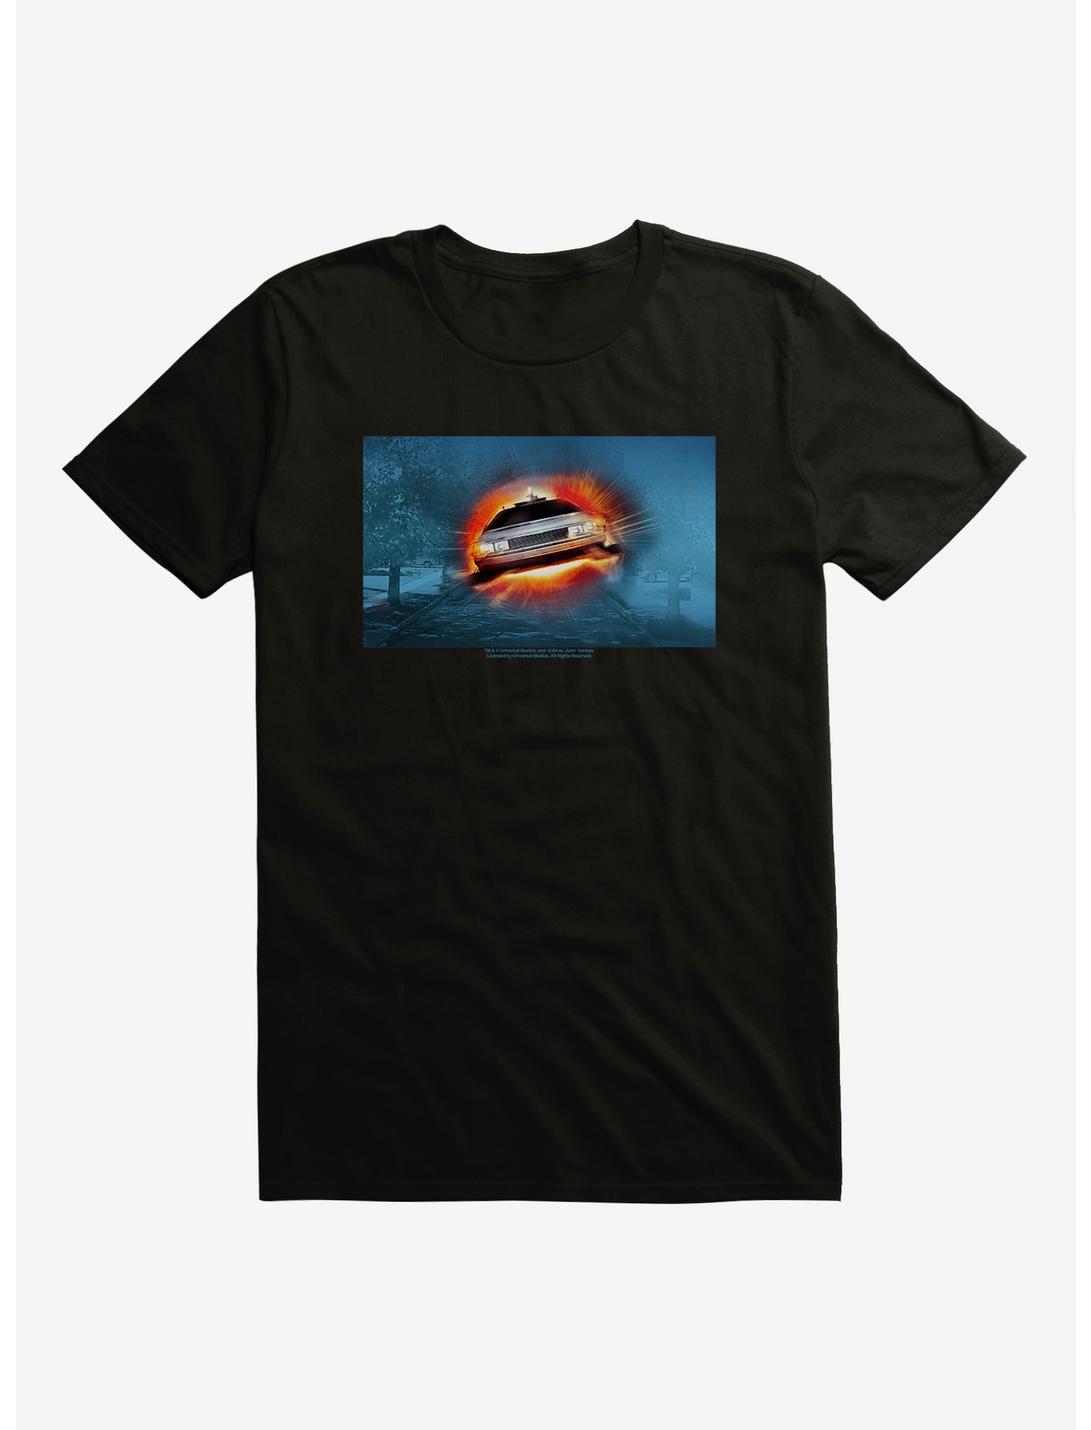 Back To The Future Traveling Through Time T-Shirt, BLACK, hi-res